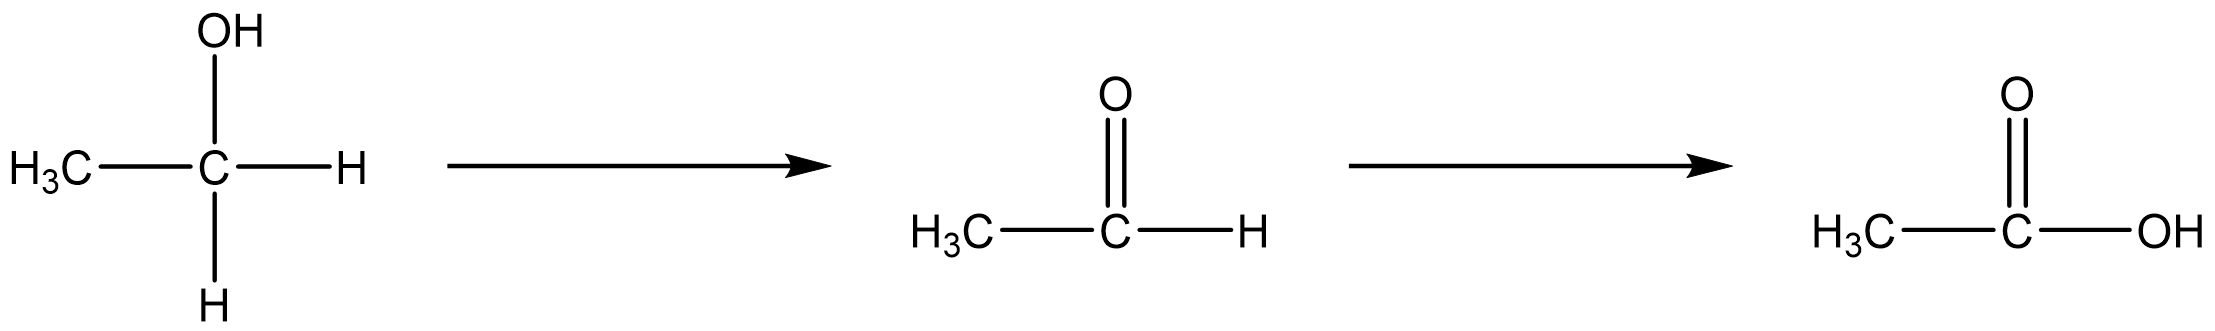 complete oxidation of a primary alcohol